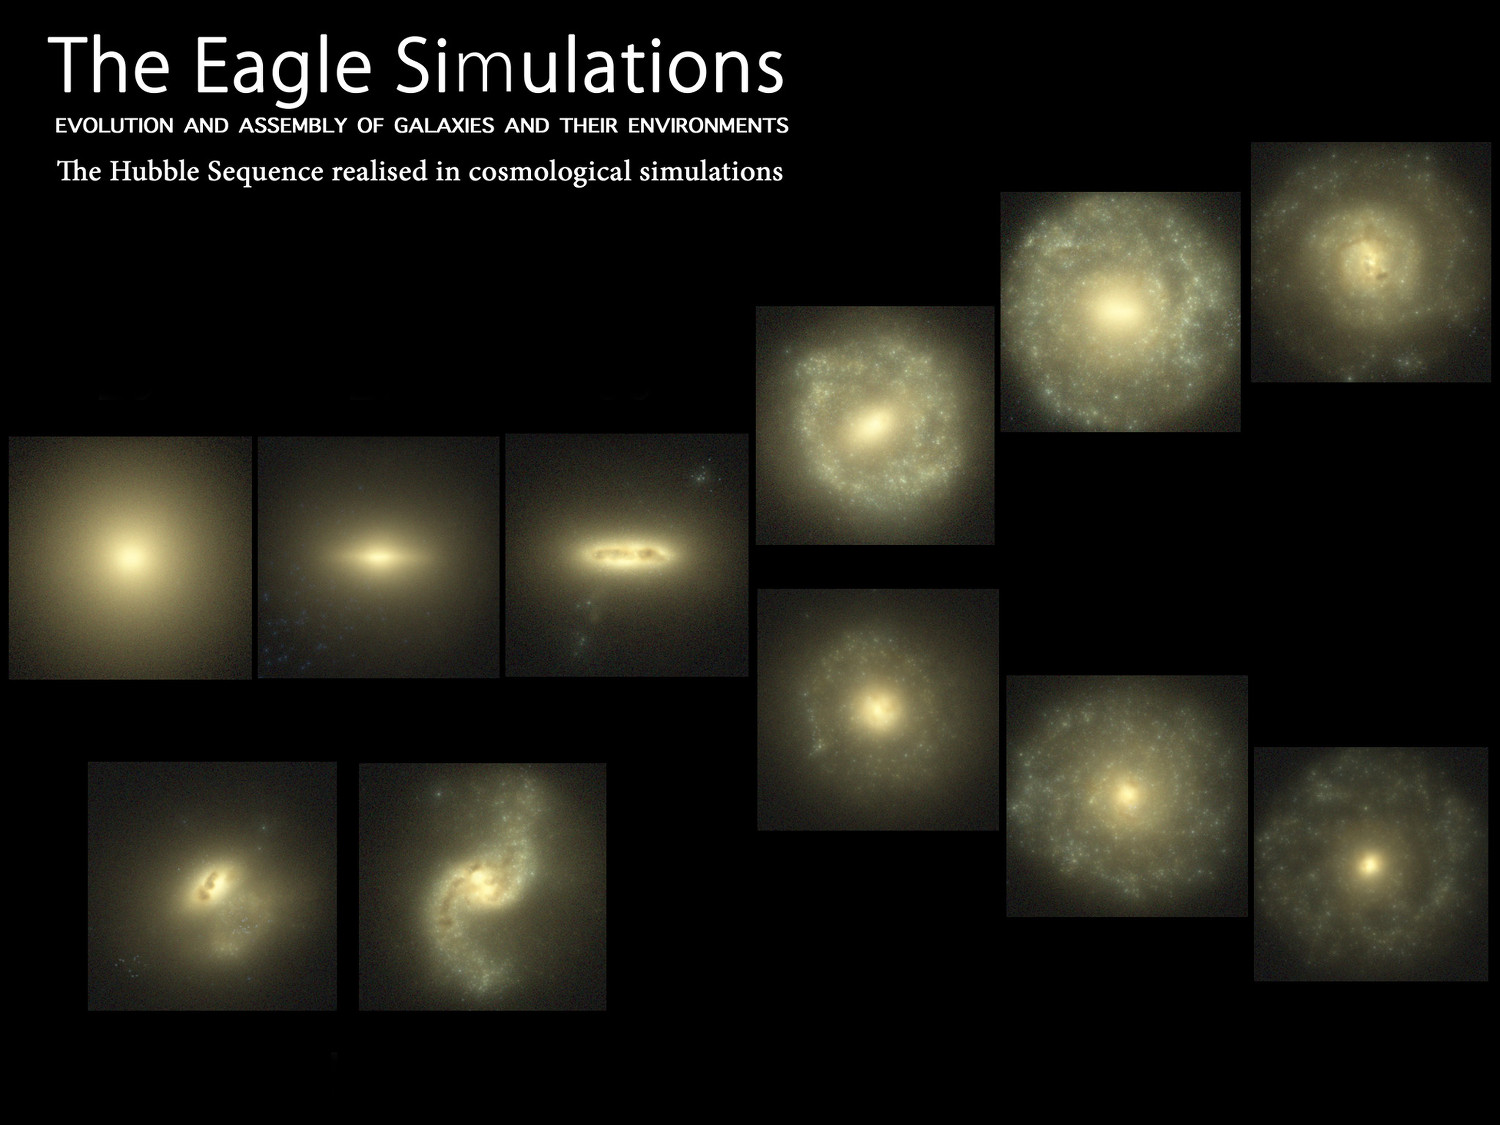 Morphology and color of EAGLE galaxy population